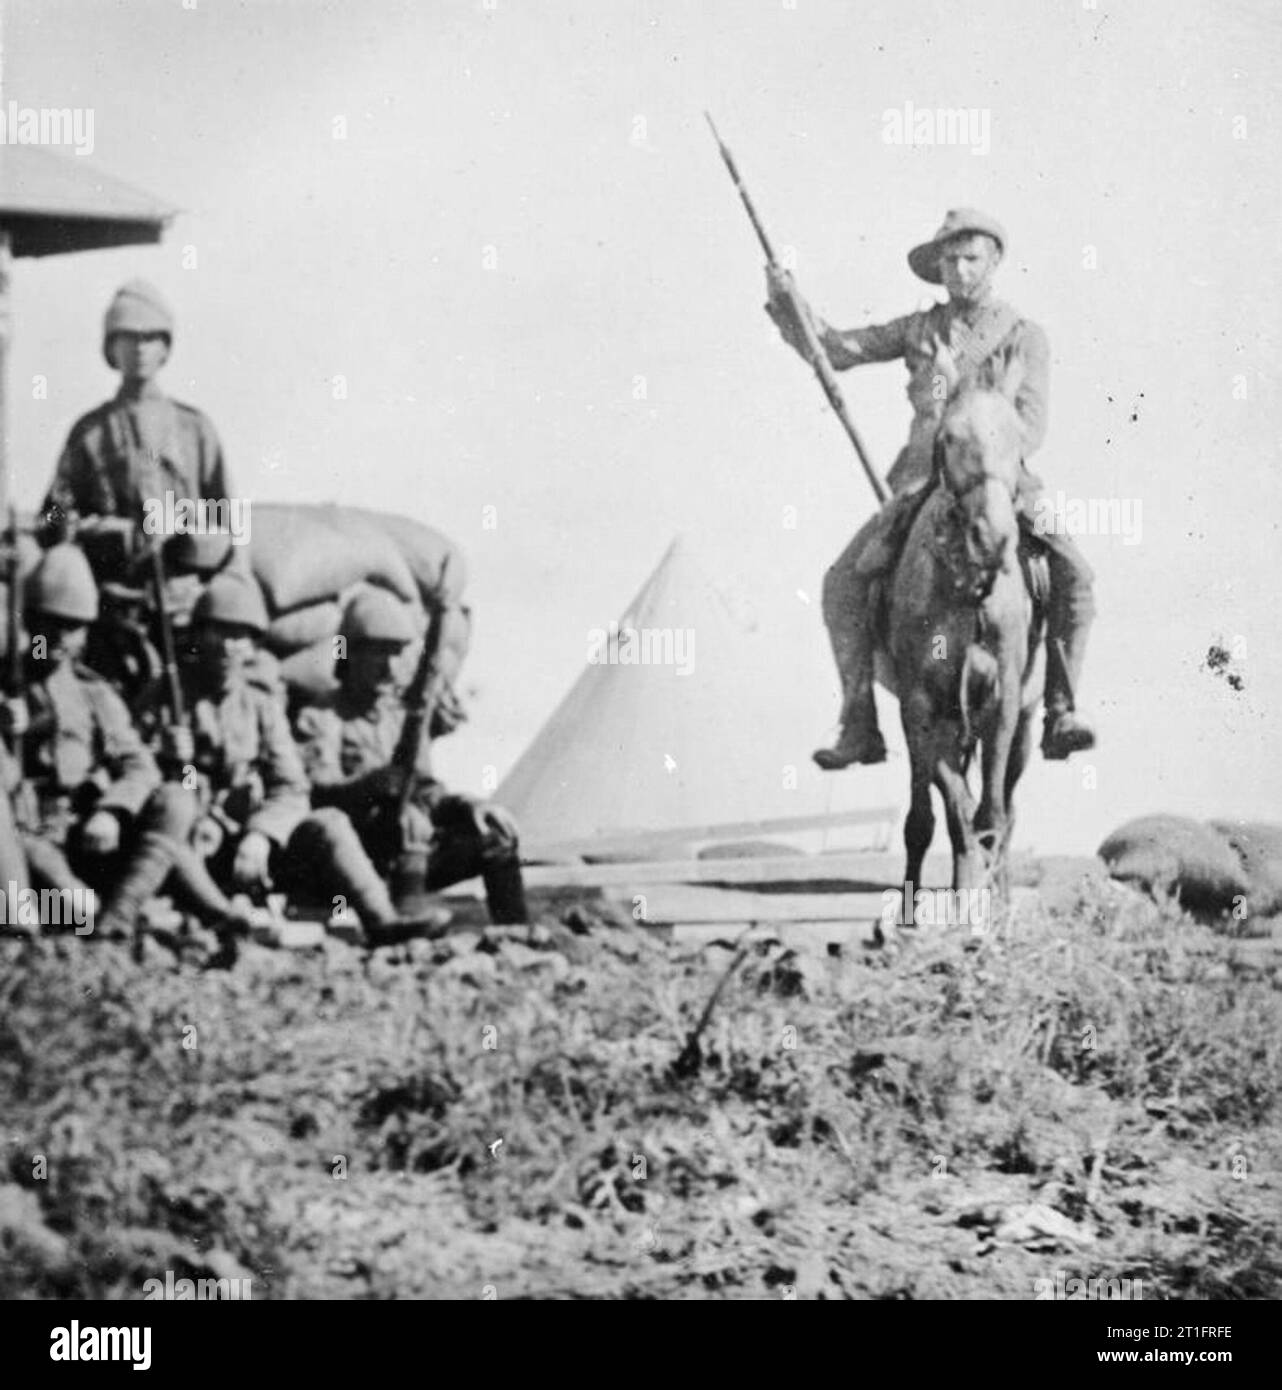 The Second Boer War, 1899-1902 Troops of one of the British mounted regiments in their camp. Stock Photo